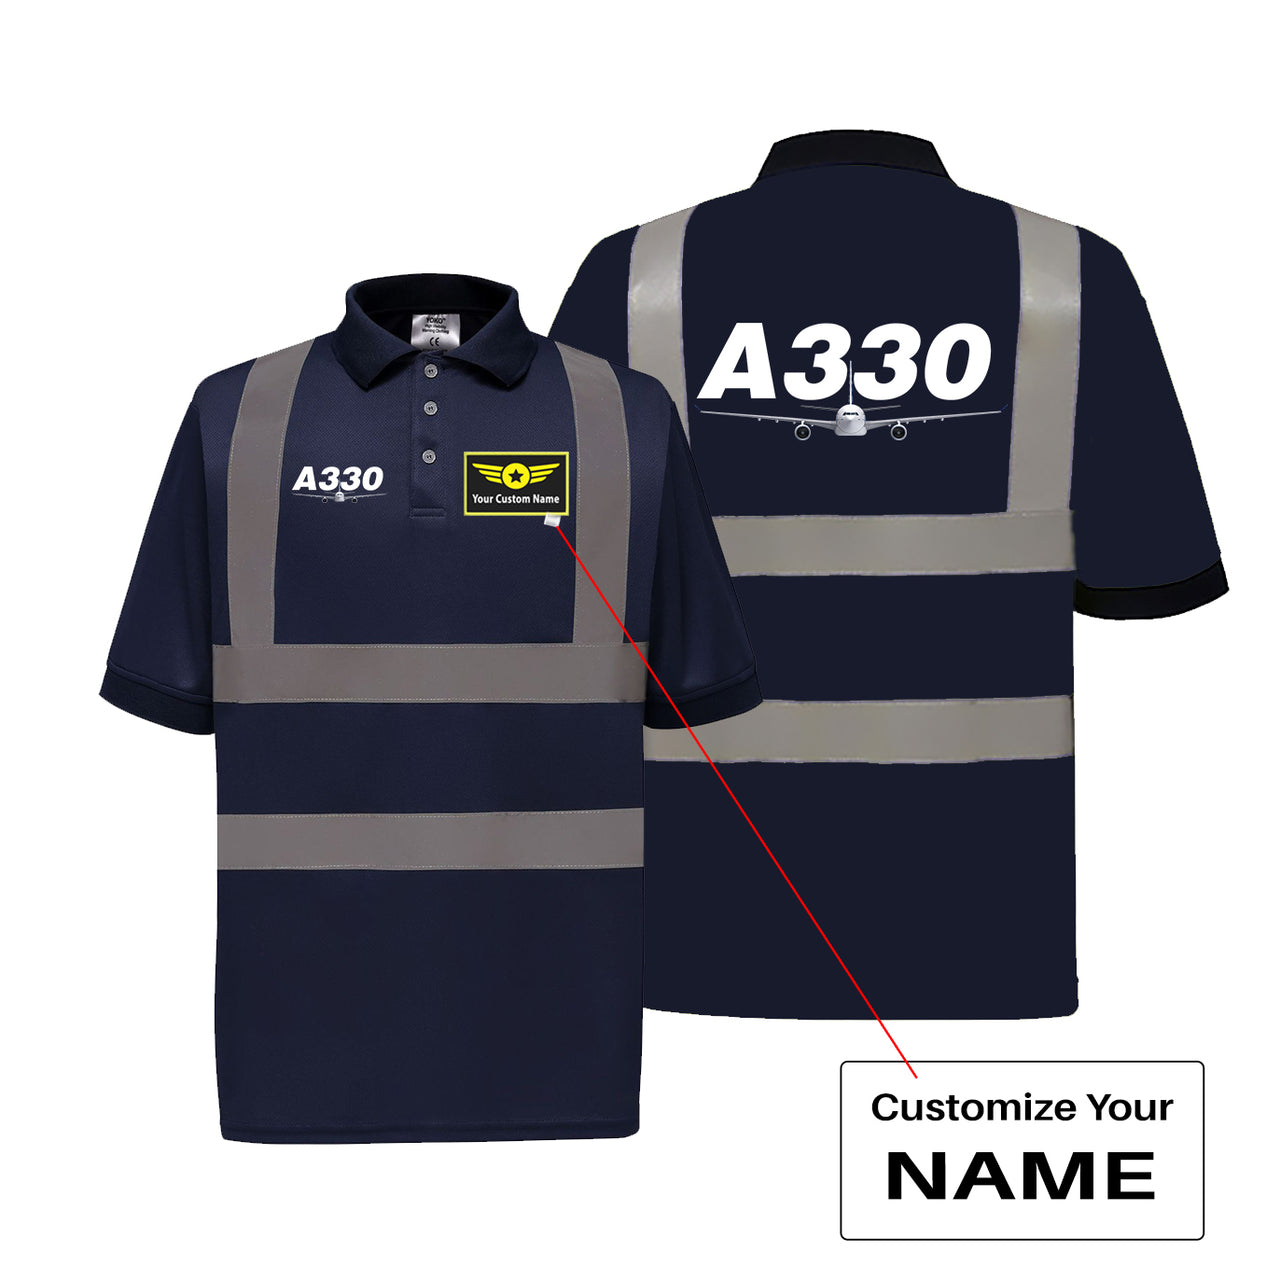 Super Airbus A330 Designed Reflective Polo T-Shirts